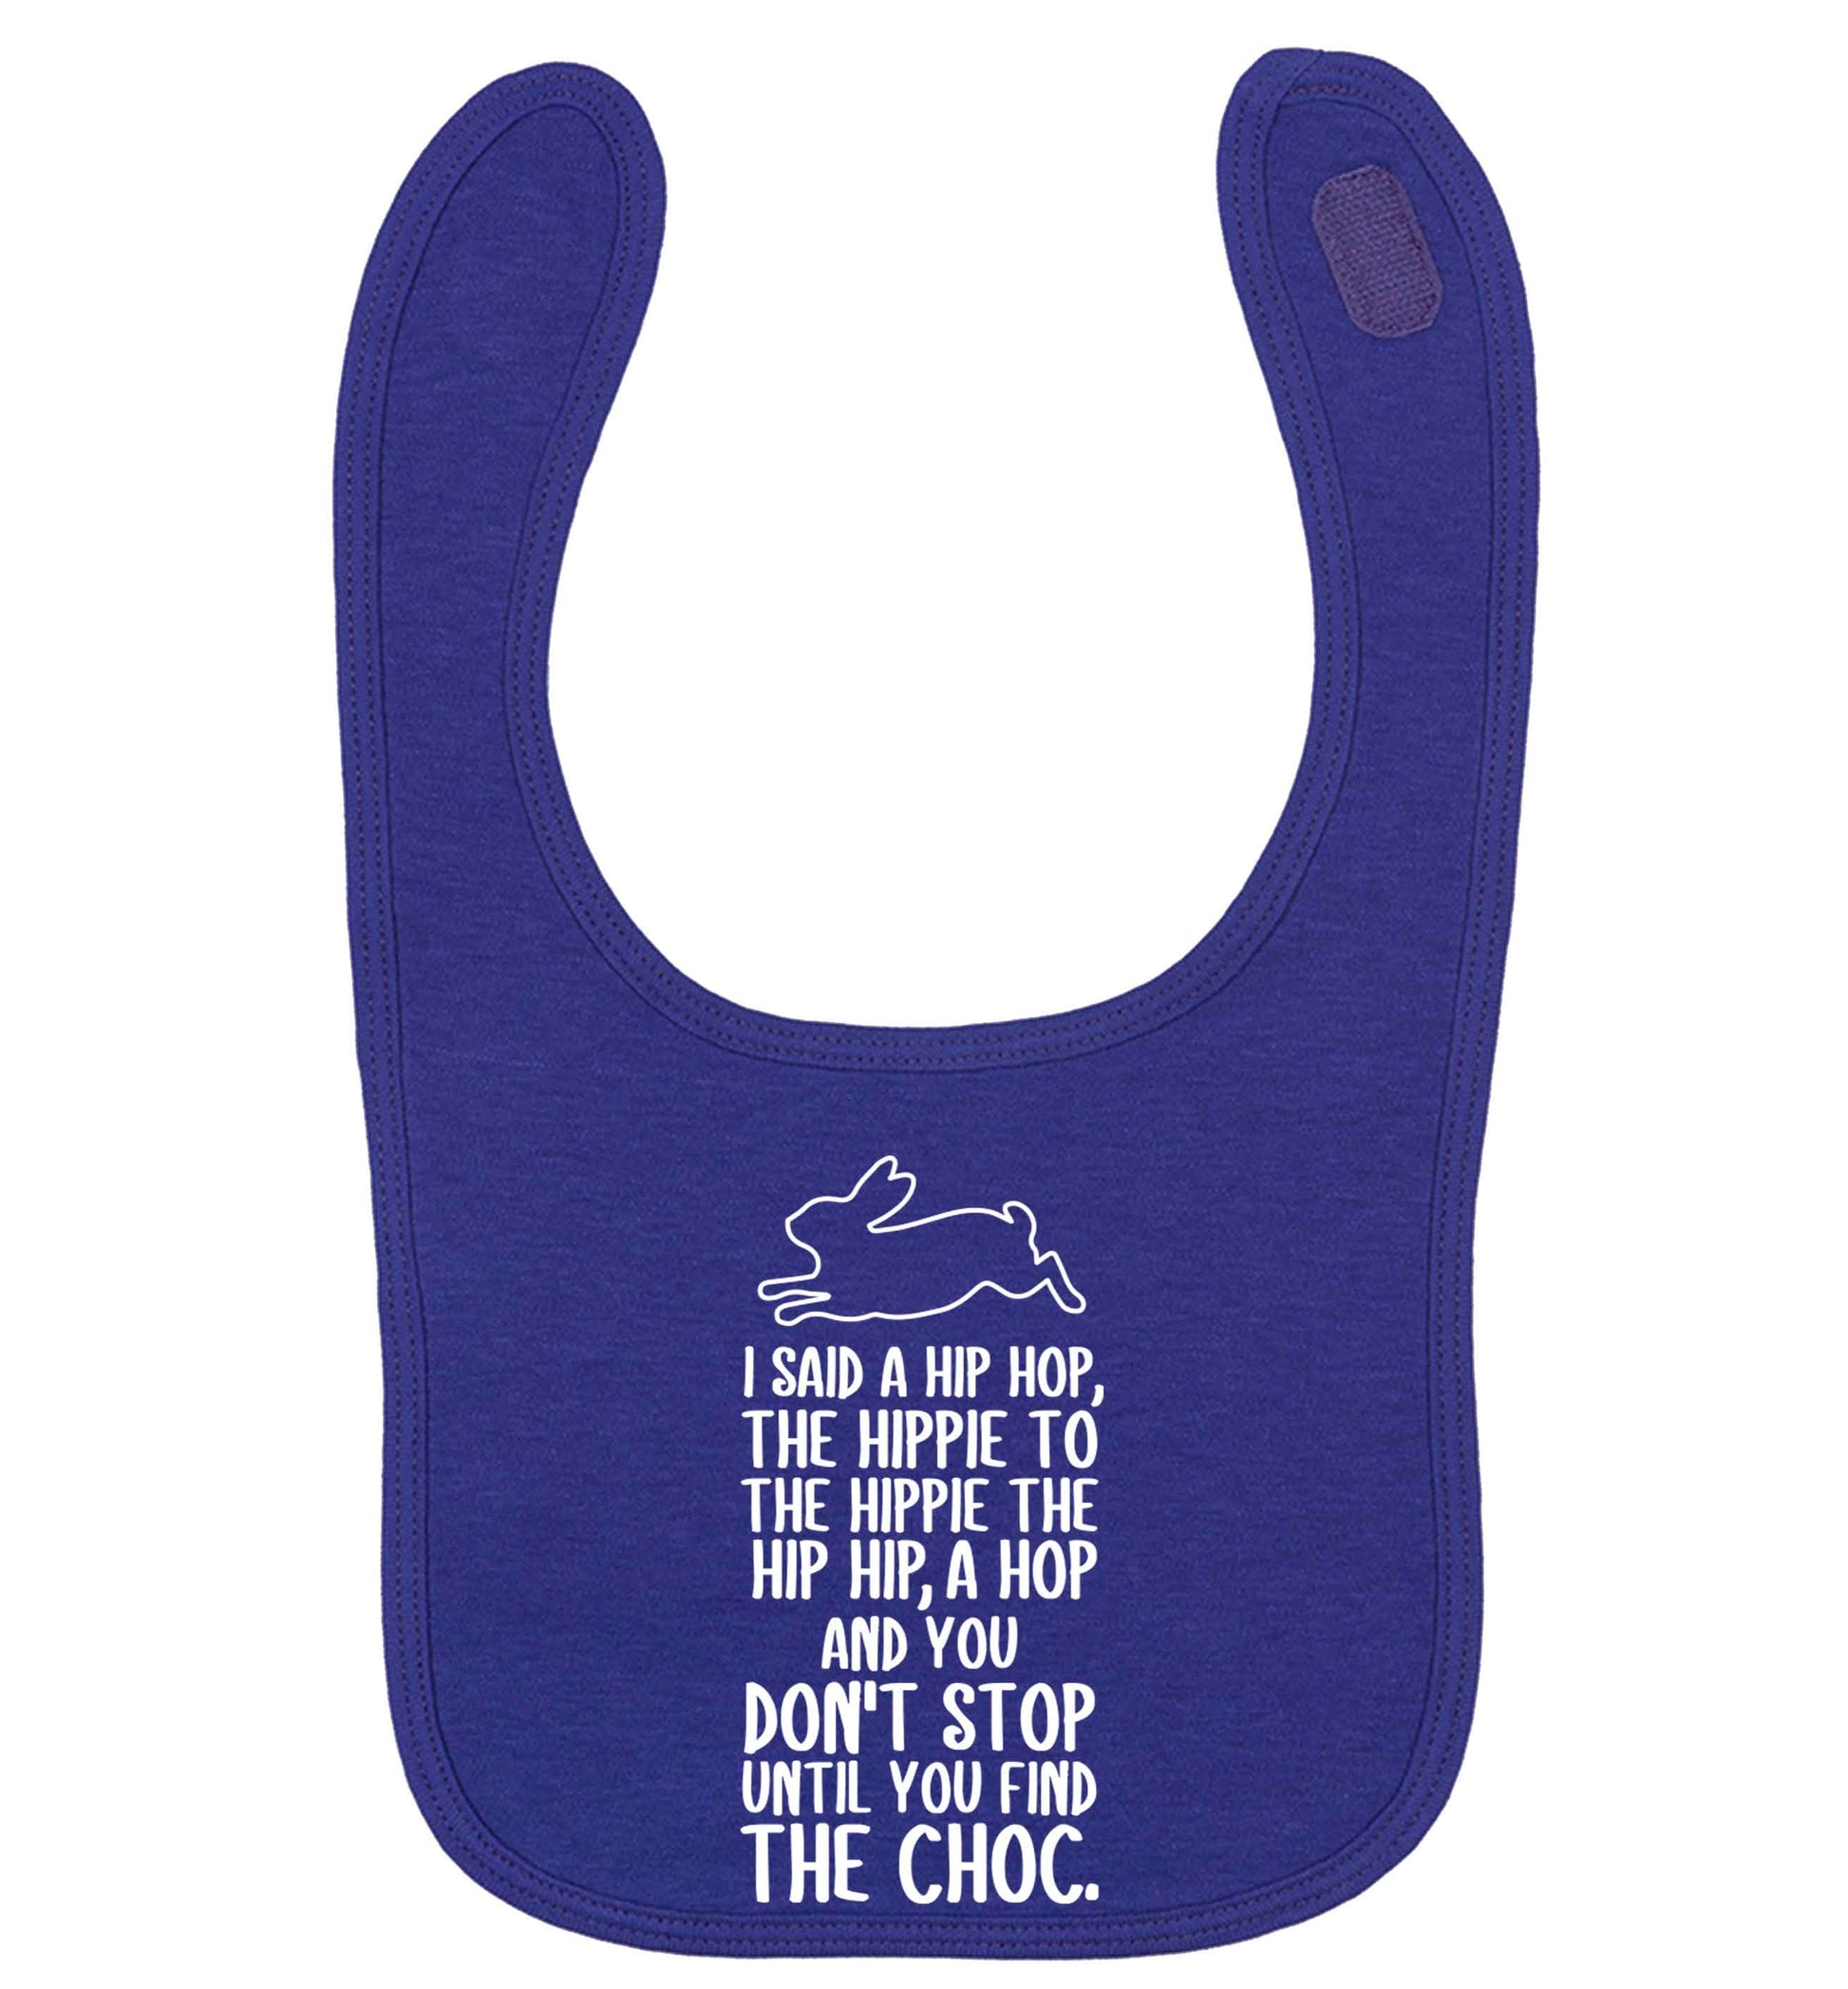 Don't stop until you find the choc | baby bib